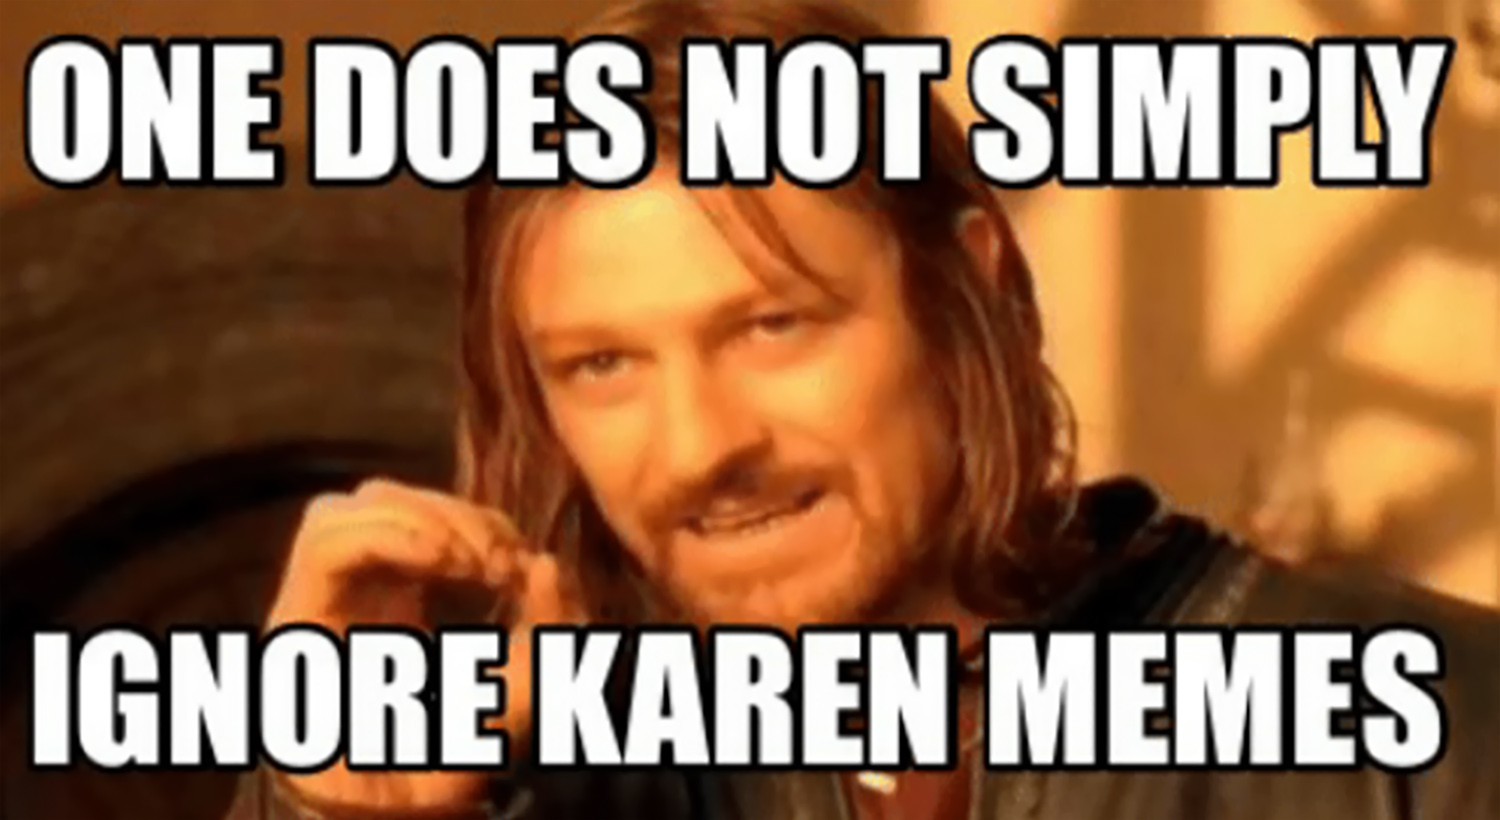 Enough already with the Karen memes - The BlueView